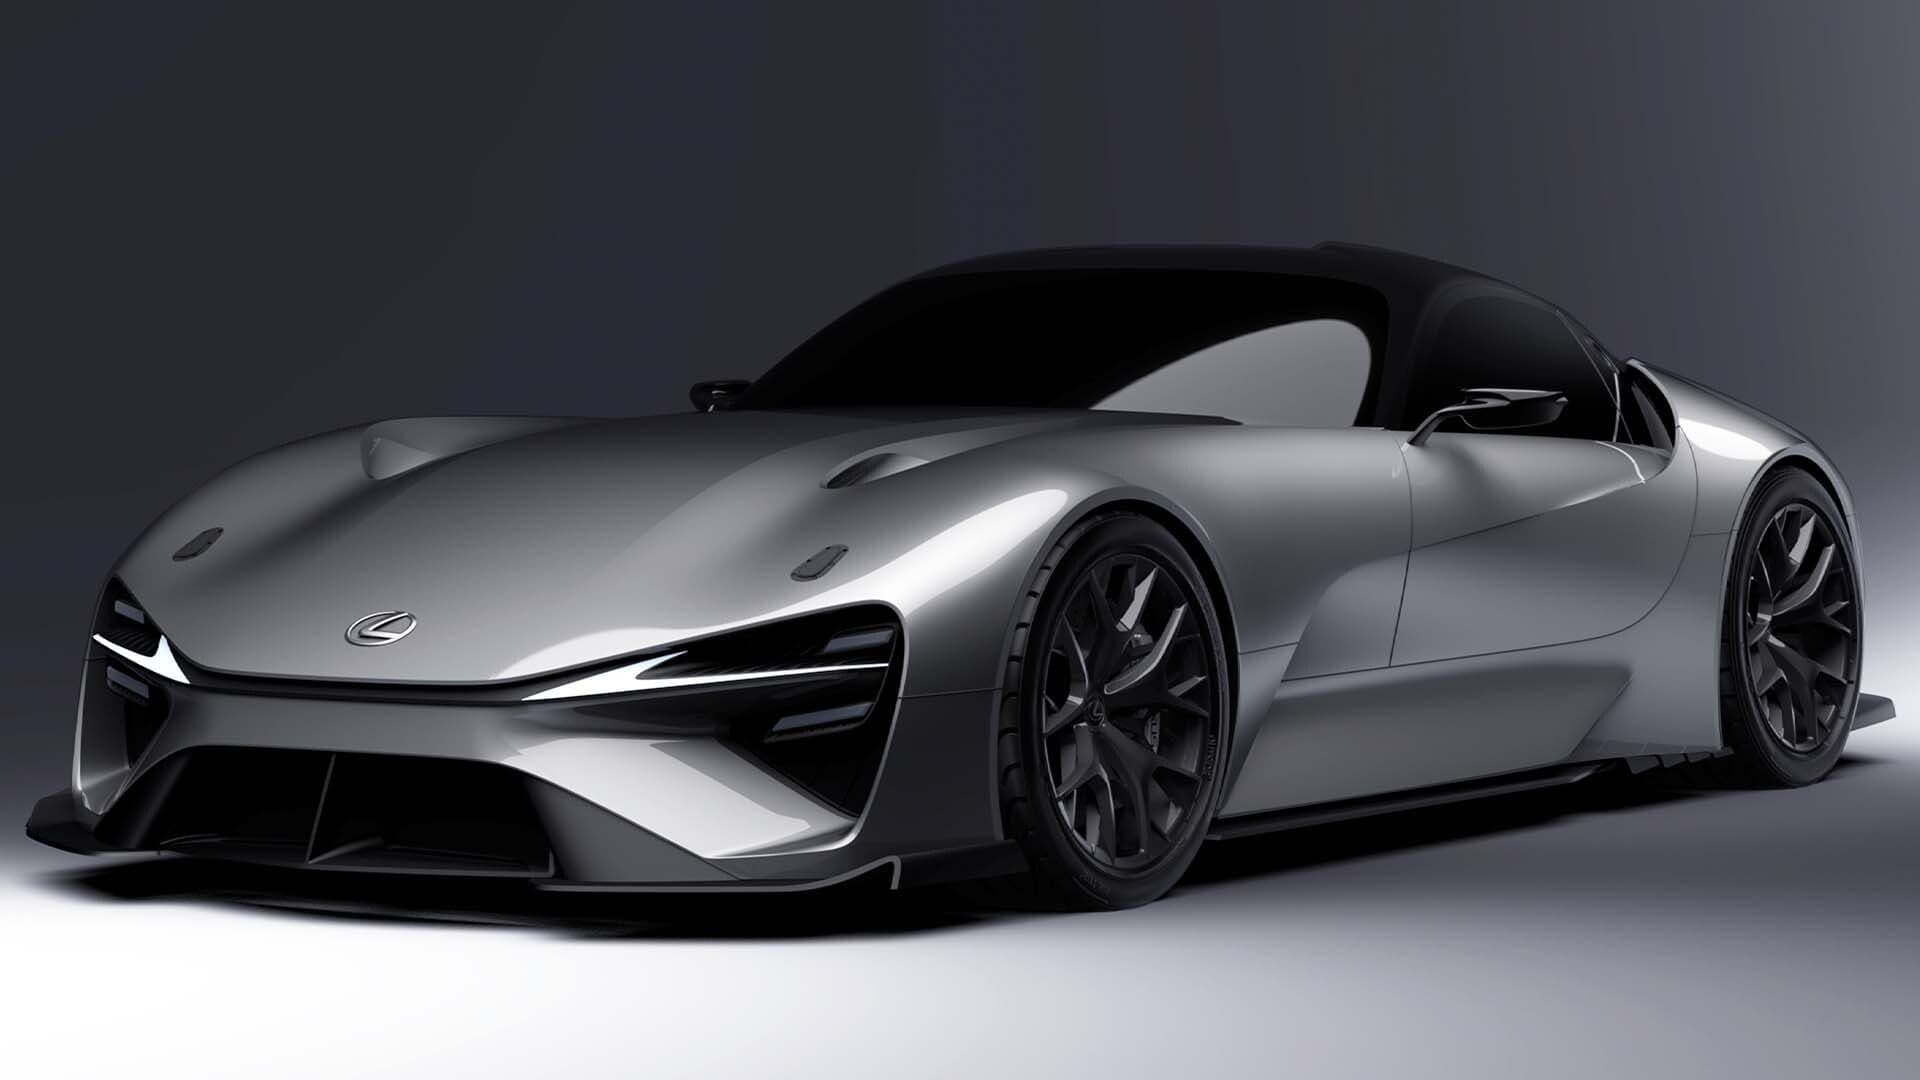 Toyota Showed an Electric Lexus LFA Successor With Solid-State Batteries